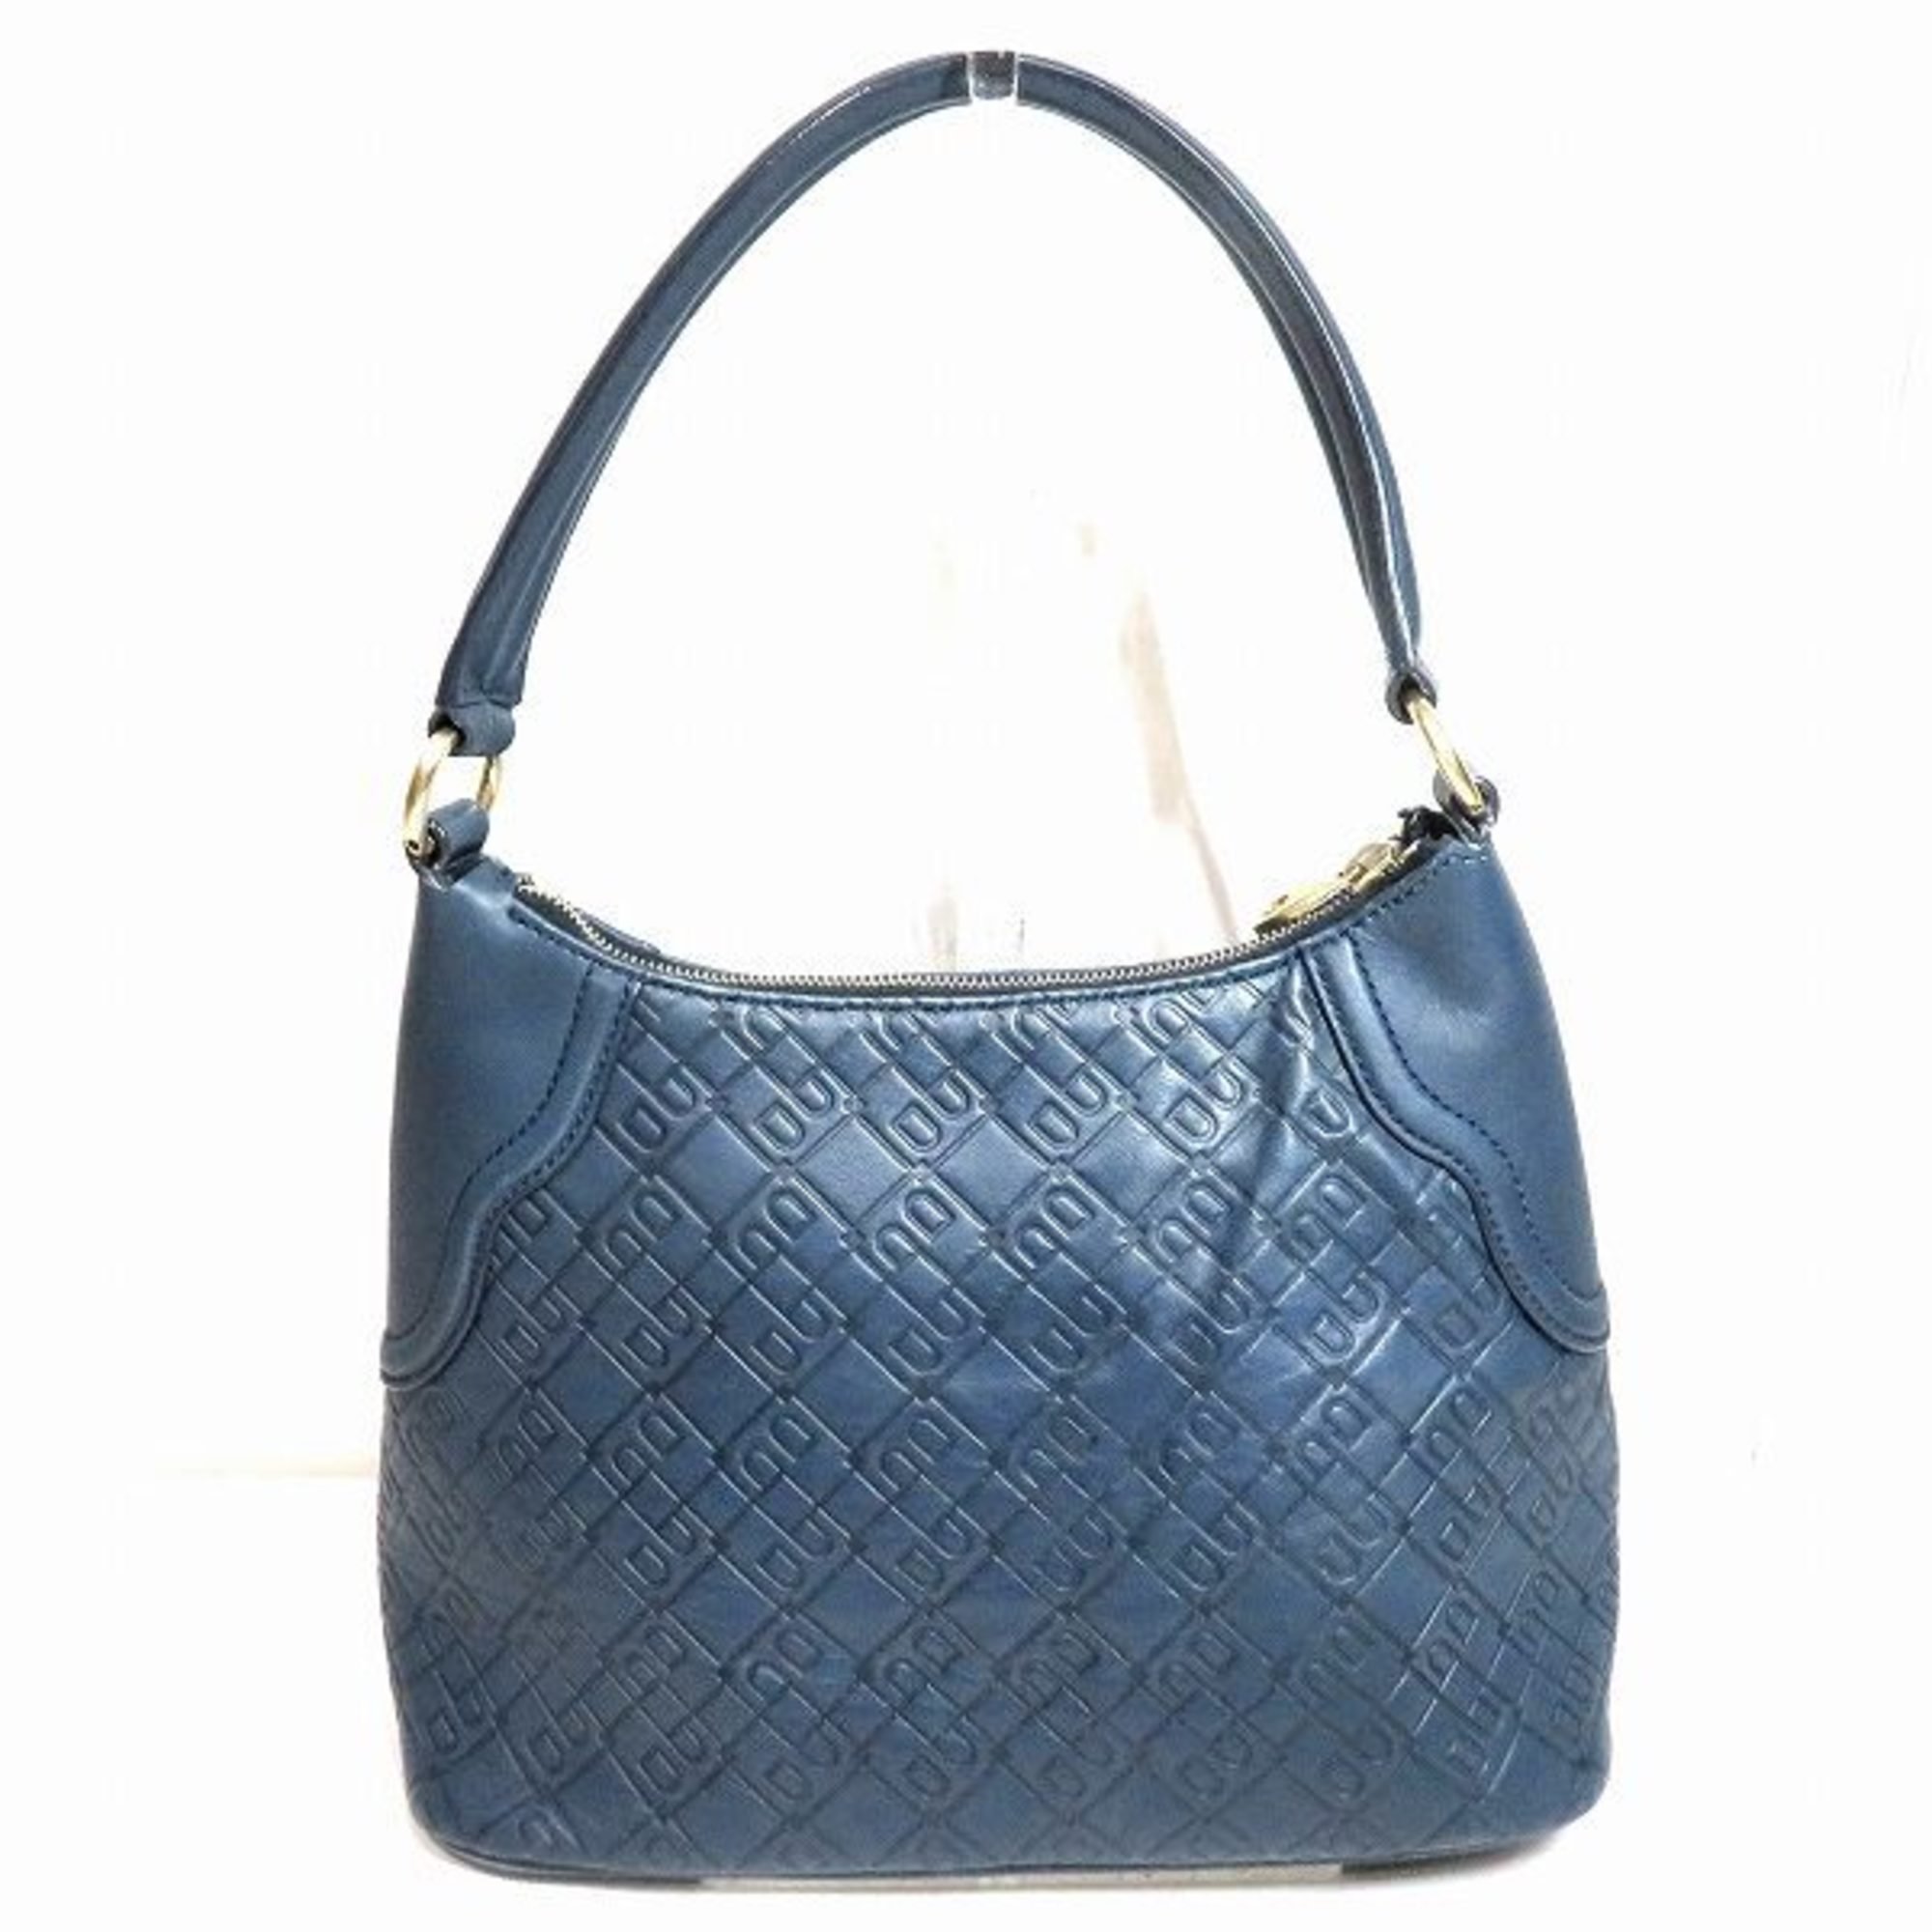 Bally Navy Quilted Leather Bag Handbag Women's